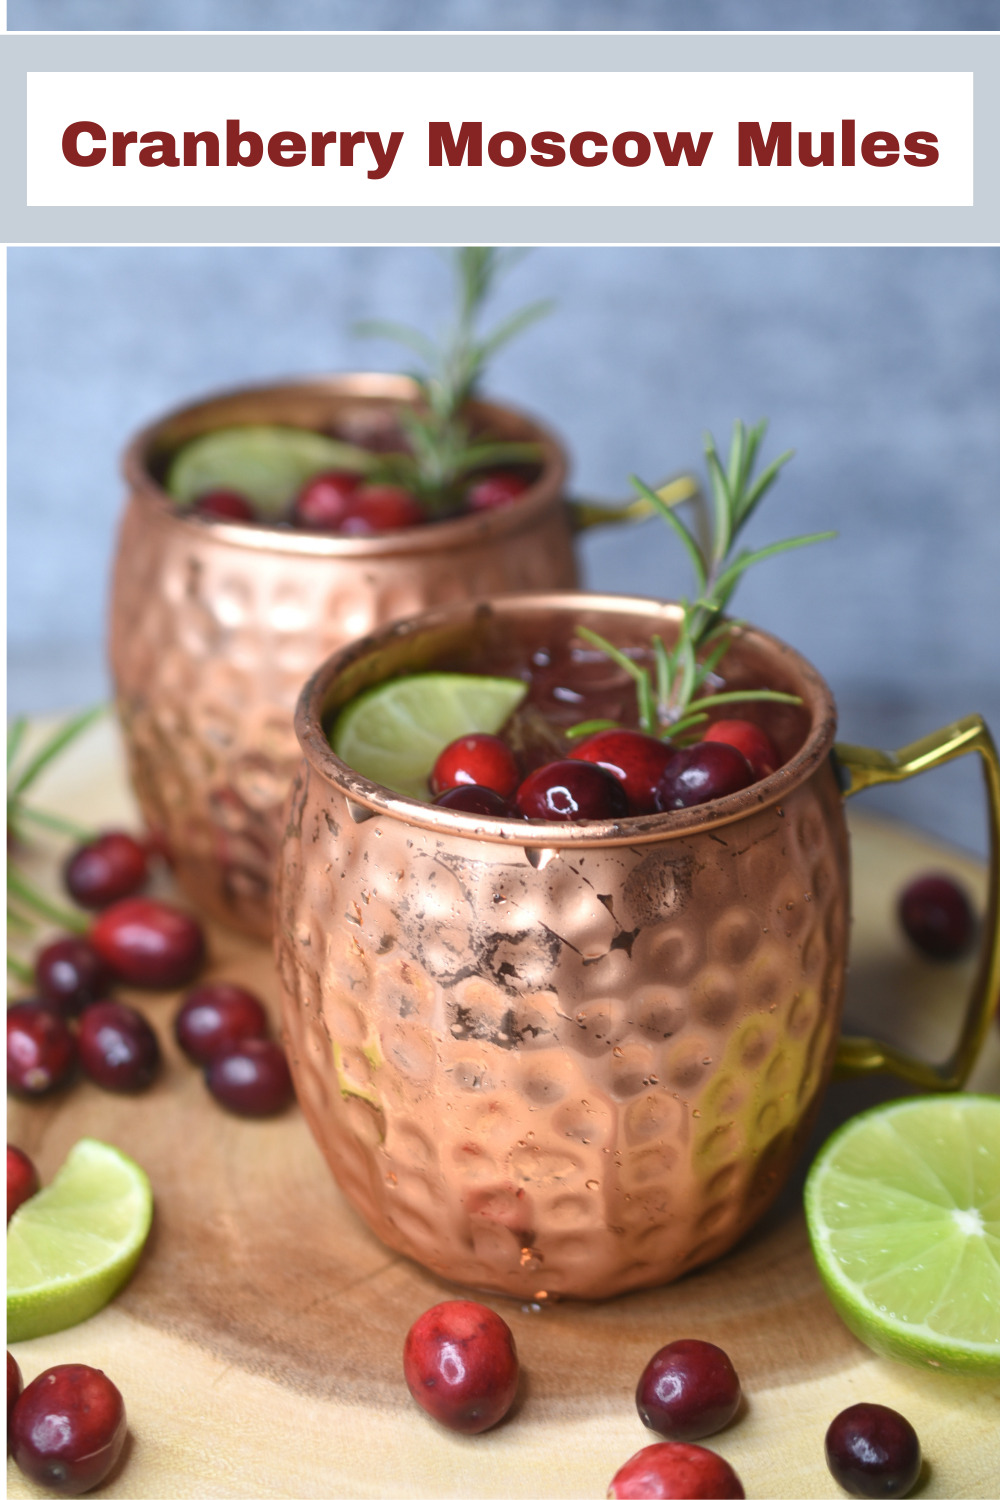 Cranberry Moscow Mule recipe. Christmas Mule. Christmas Moscow Mule.